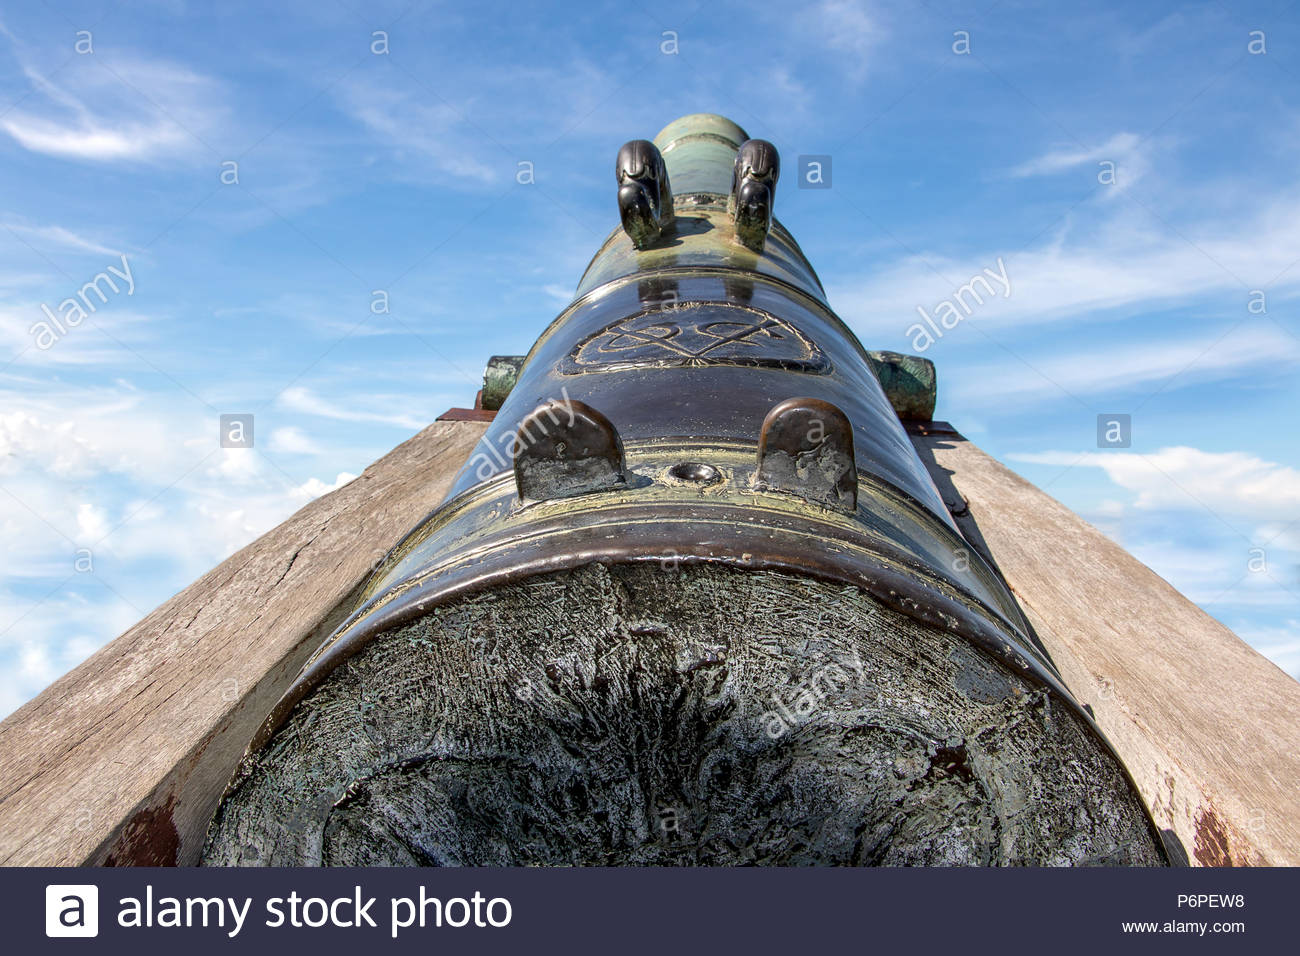 The Old Large Caliber Cannon Heads To Blue Sky Decorative